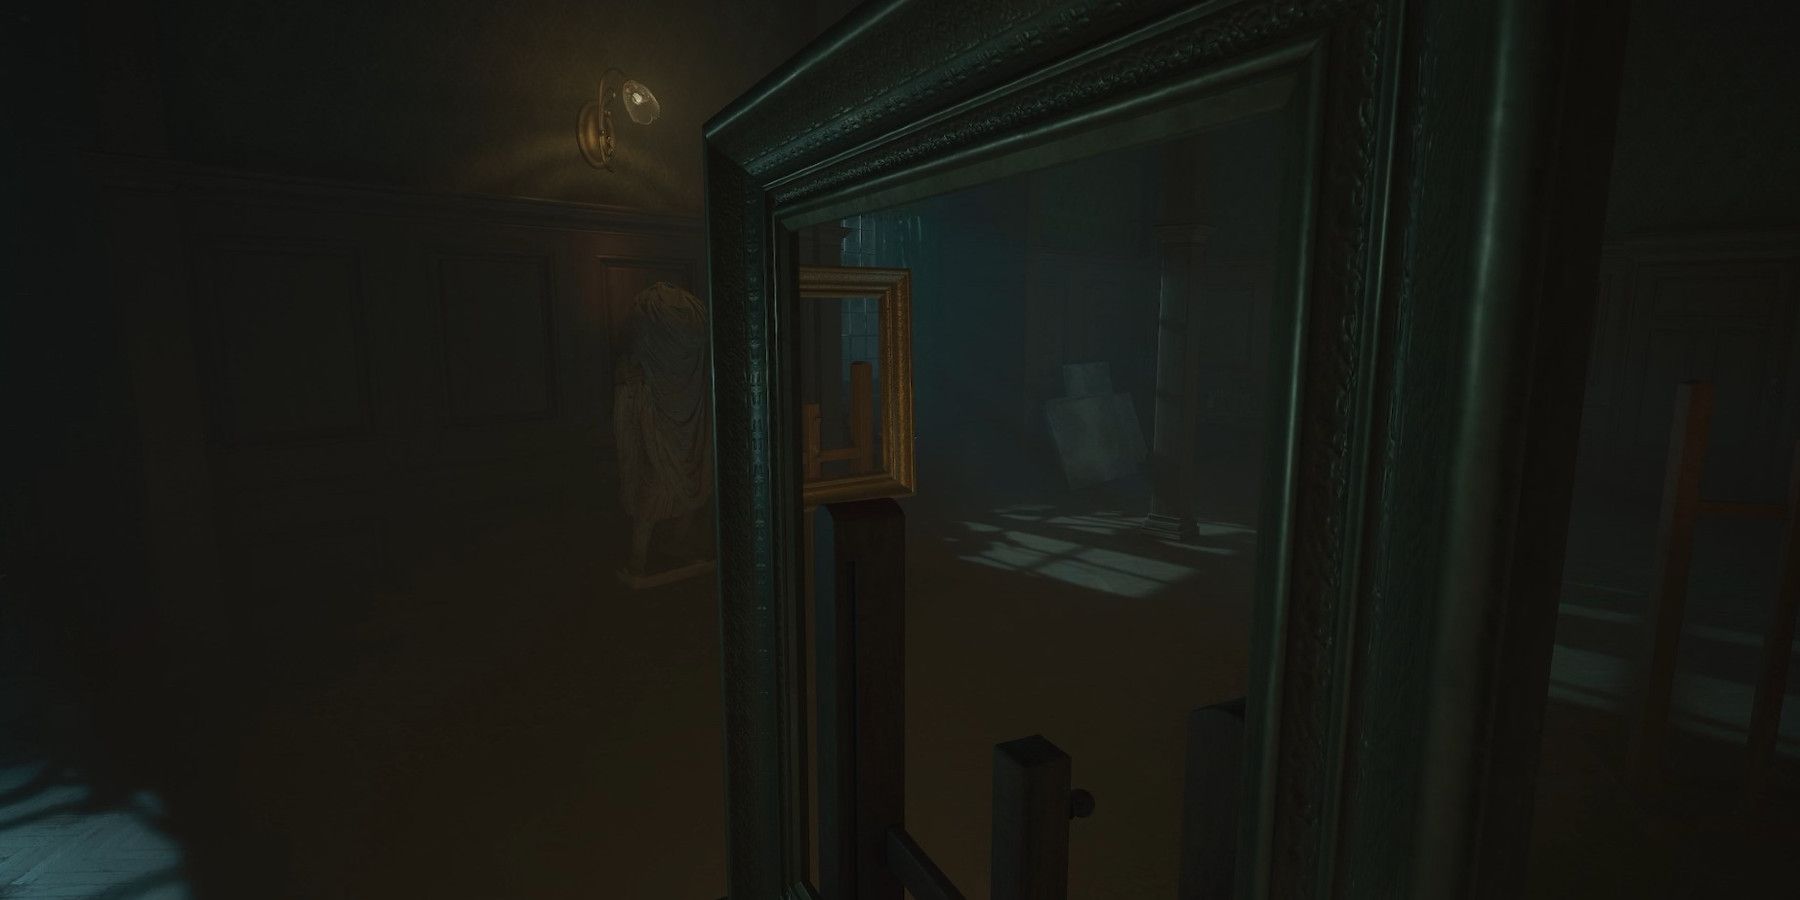 layers of fear - canvas puzzle - through the canvas